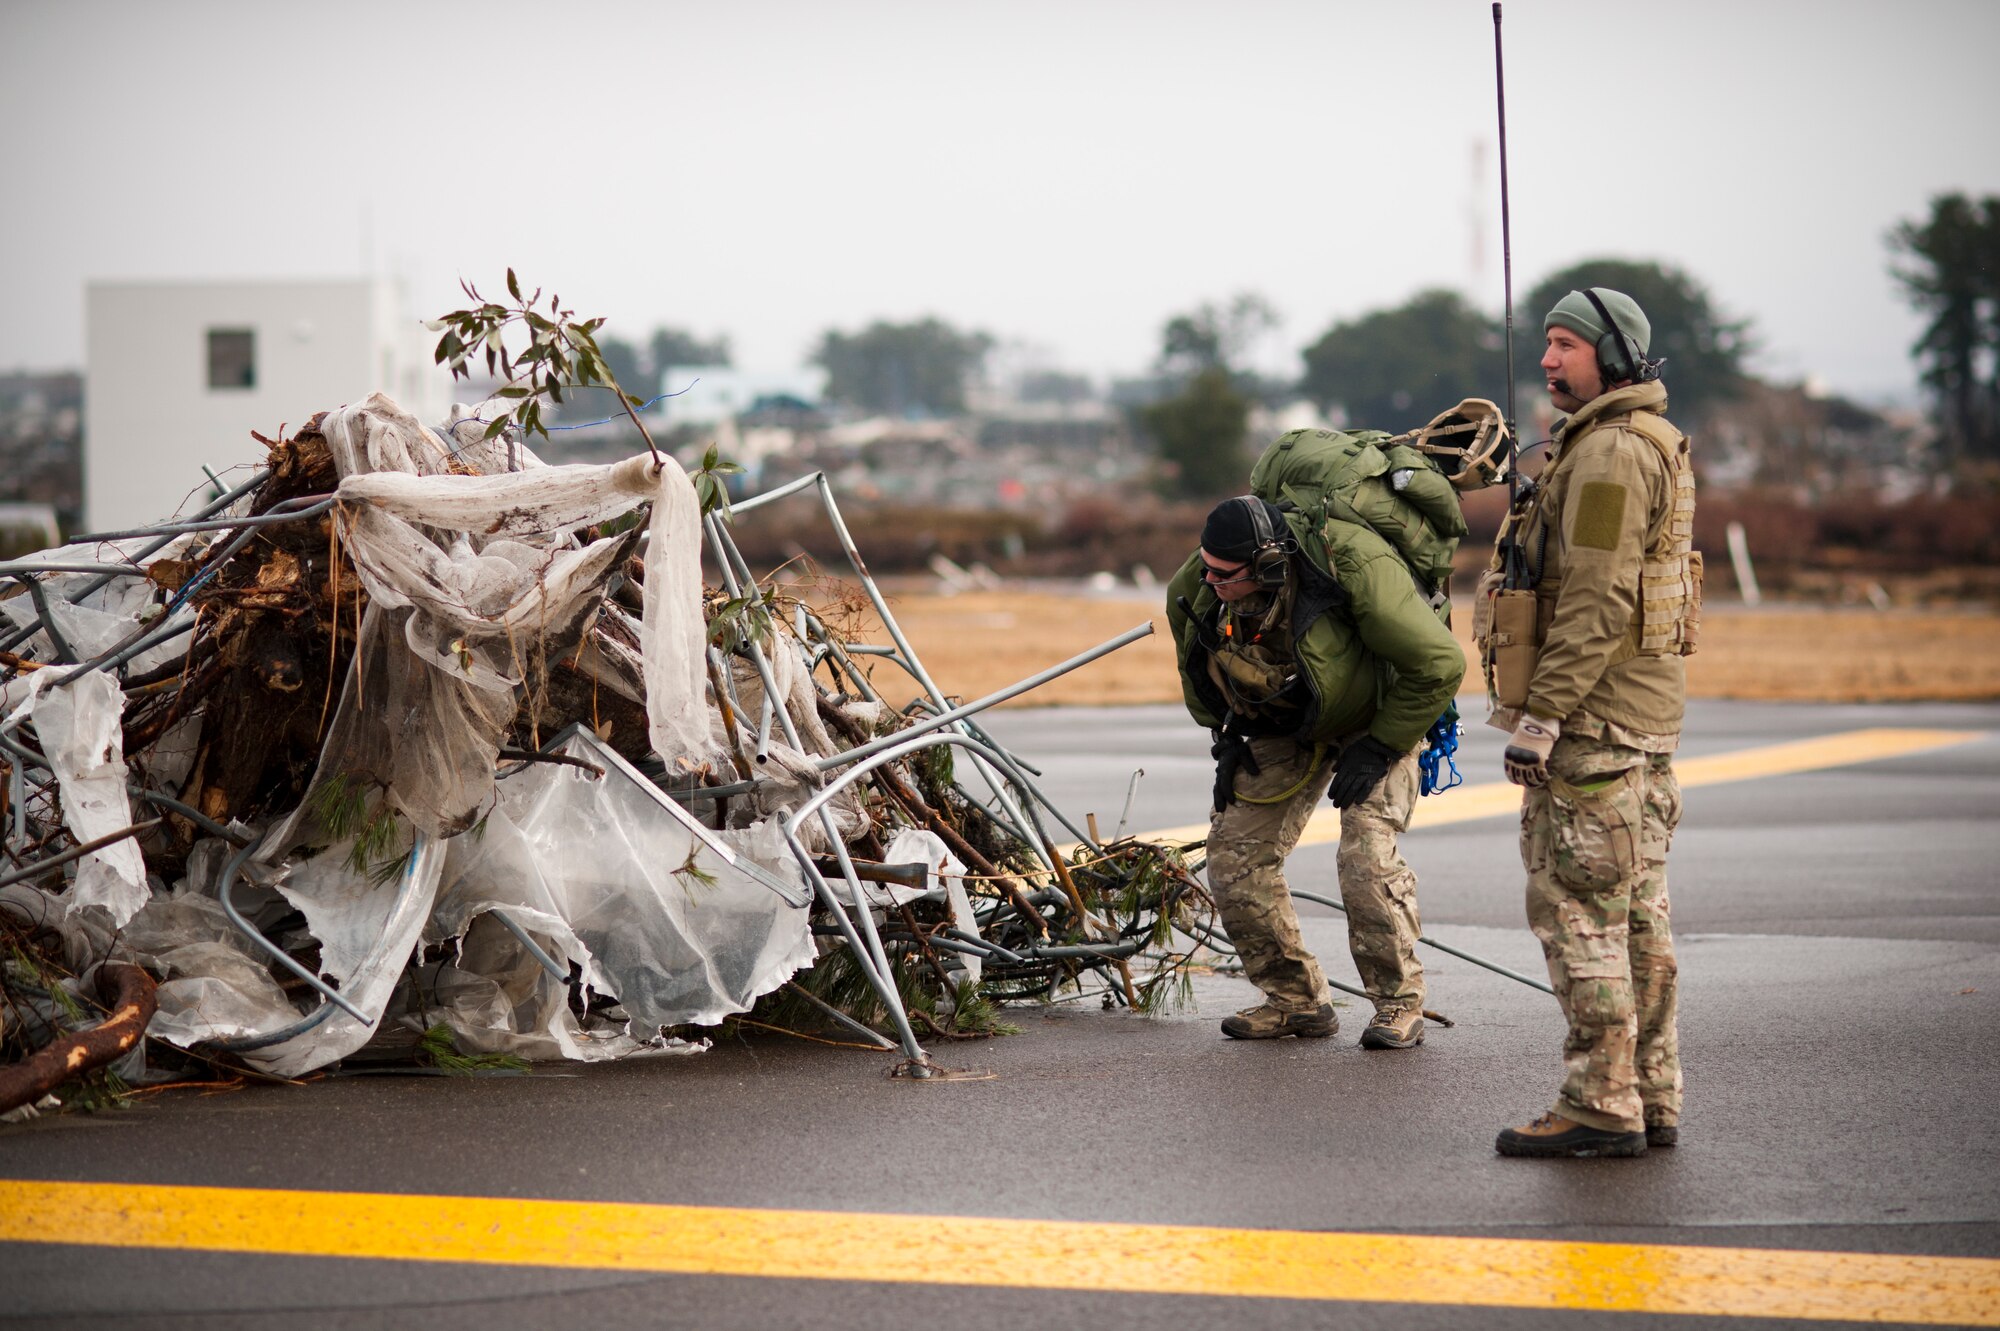 SENDAI AIRPORT, Japan -- Airmen from the 320th Special Tactics Squadron assess debris on the runway here March 16. Members of the 320th STS, stationed out of Kadena Air Base, deployed to Sendai Airport to help clear the runway and make it ready for fixed-wing aircraft traffic. (U.S. Air Force photo / Staff Sgt. Samuel Morse)